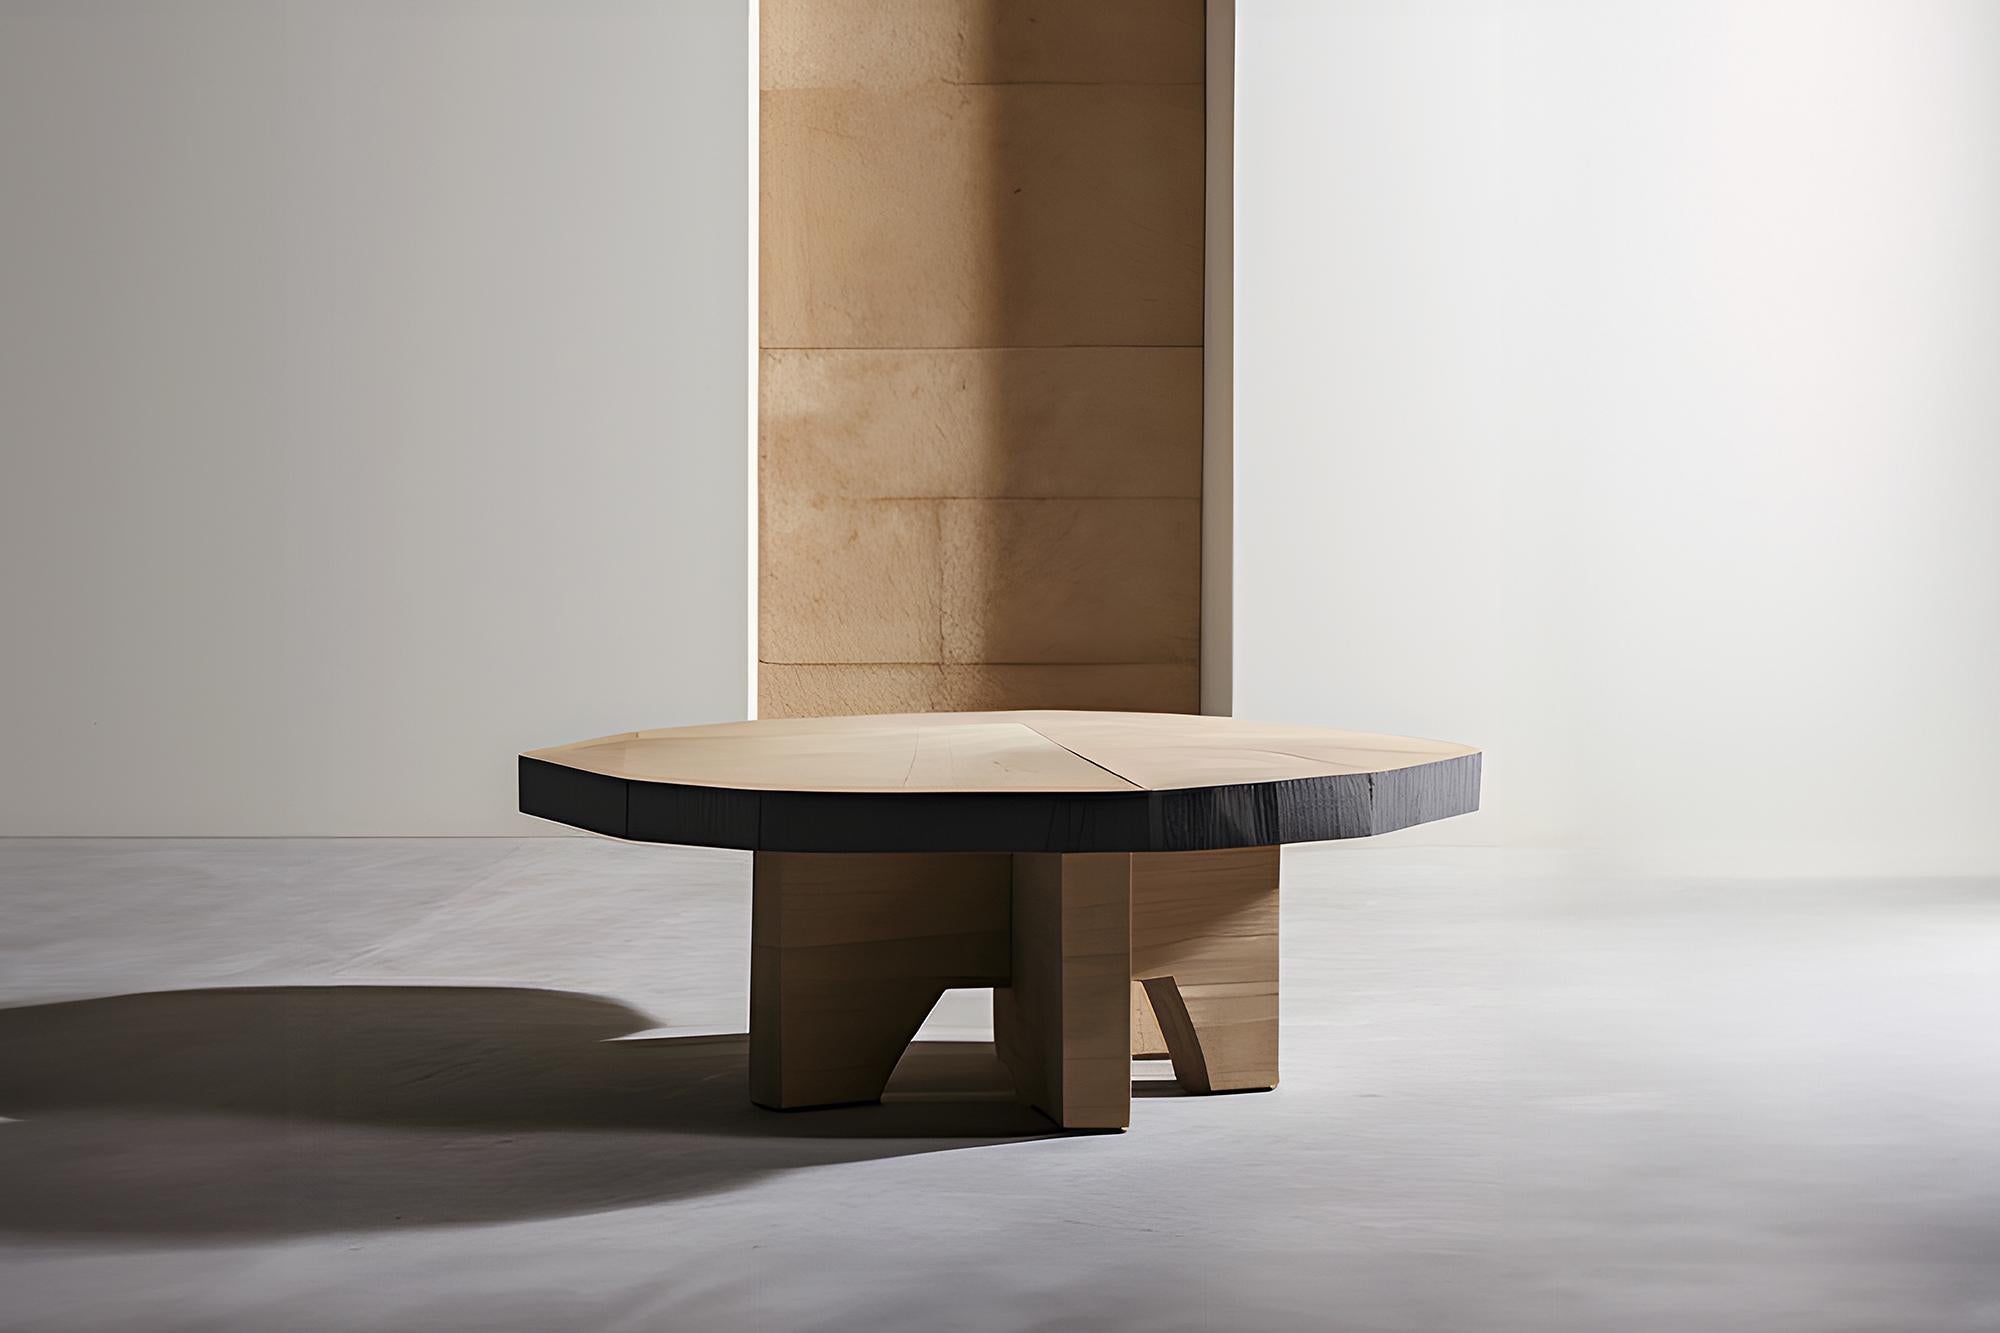 Round Top Fundamenta Coffee 48 Abstract Oak, Stylish Design by NONO

Sculptural coffee table made of solid wood with a natural water-based or black tinted finish. Due to the nature of the production process, each piece may vary in grain, texture,